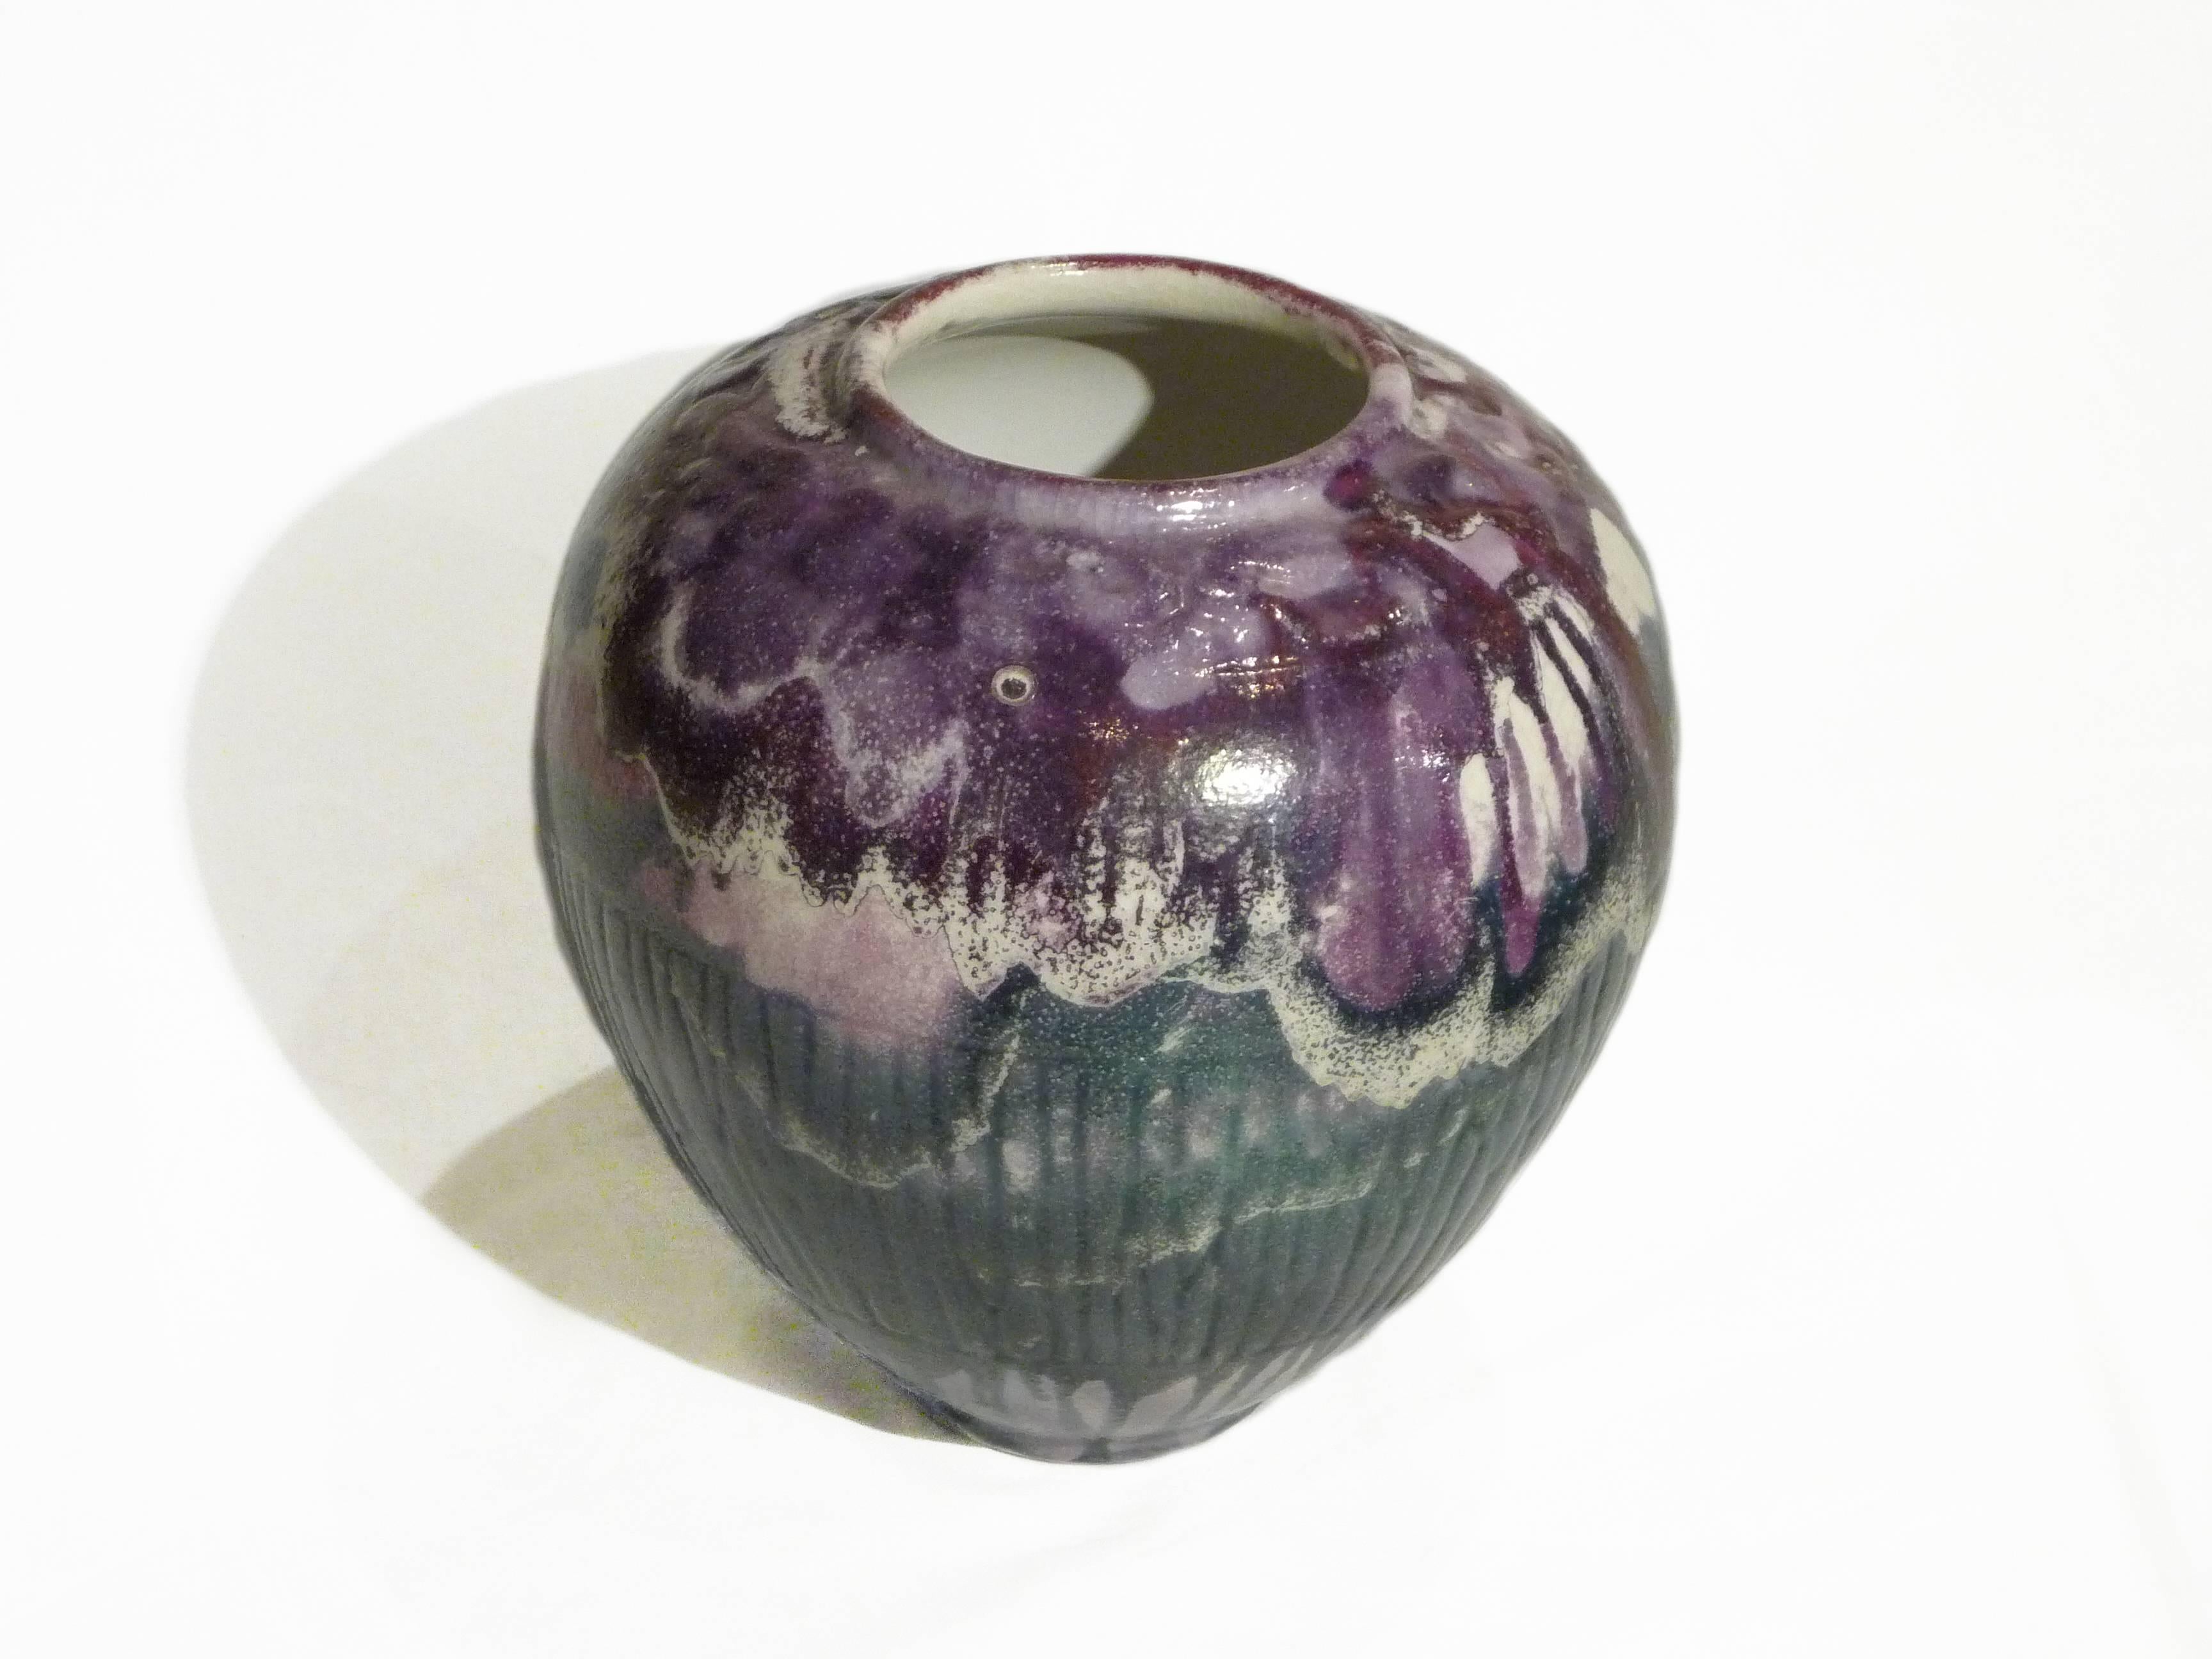 Raoul Lachenal an Art Nouveau earthenware vase decorated with vegetal patterns Mauve, green and white Signed "Raoul Lachenal.".